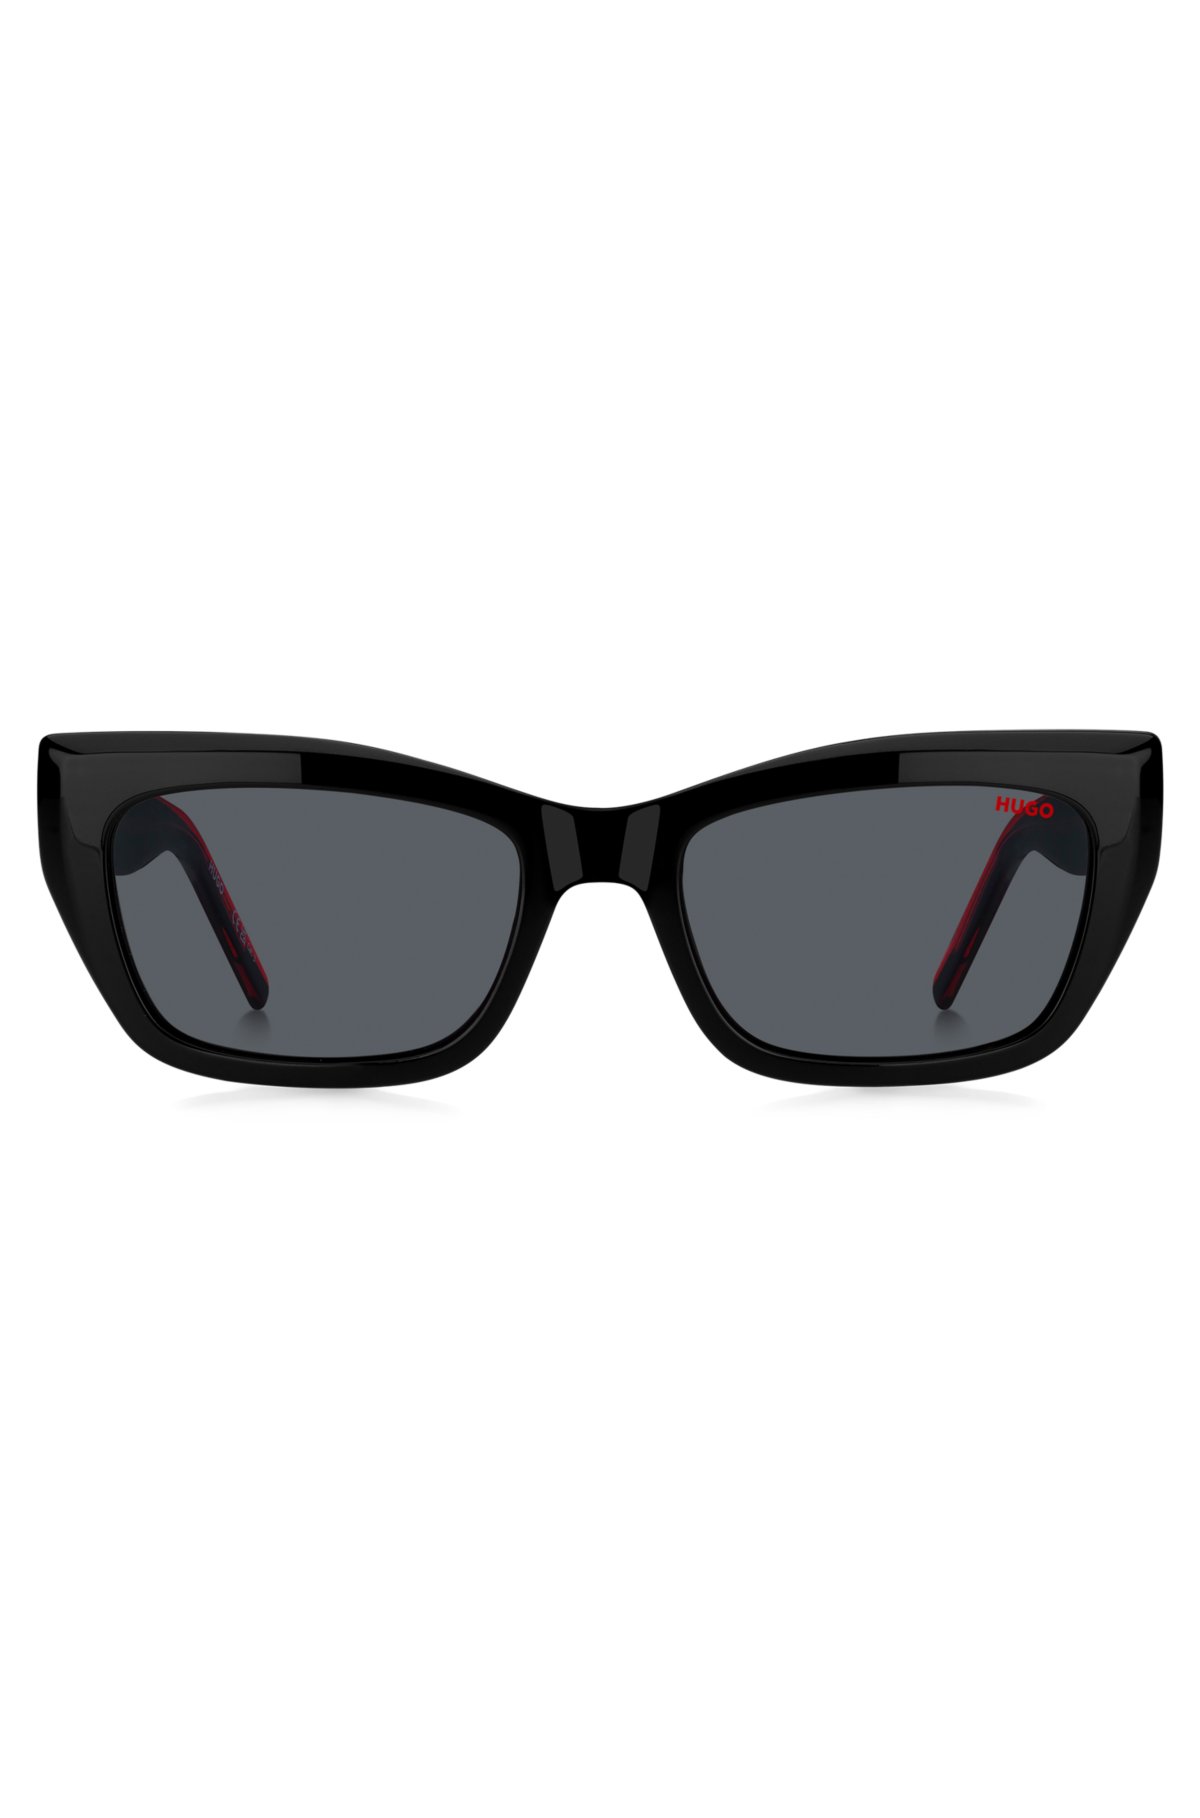 Black-acetate sunglasses with signature-red layered temples, Black